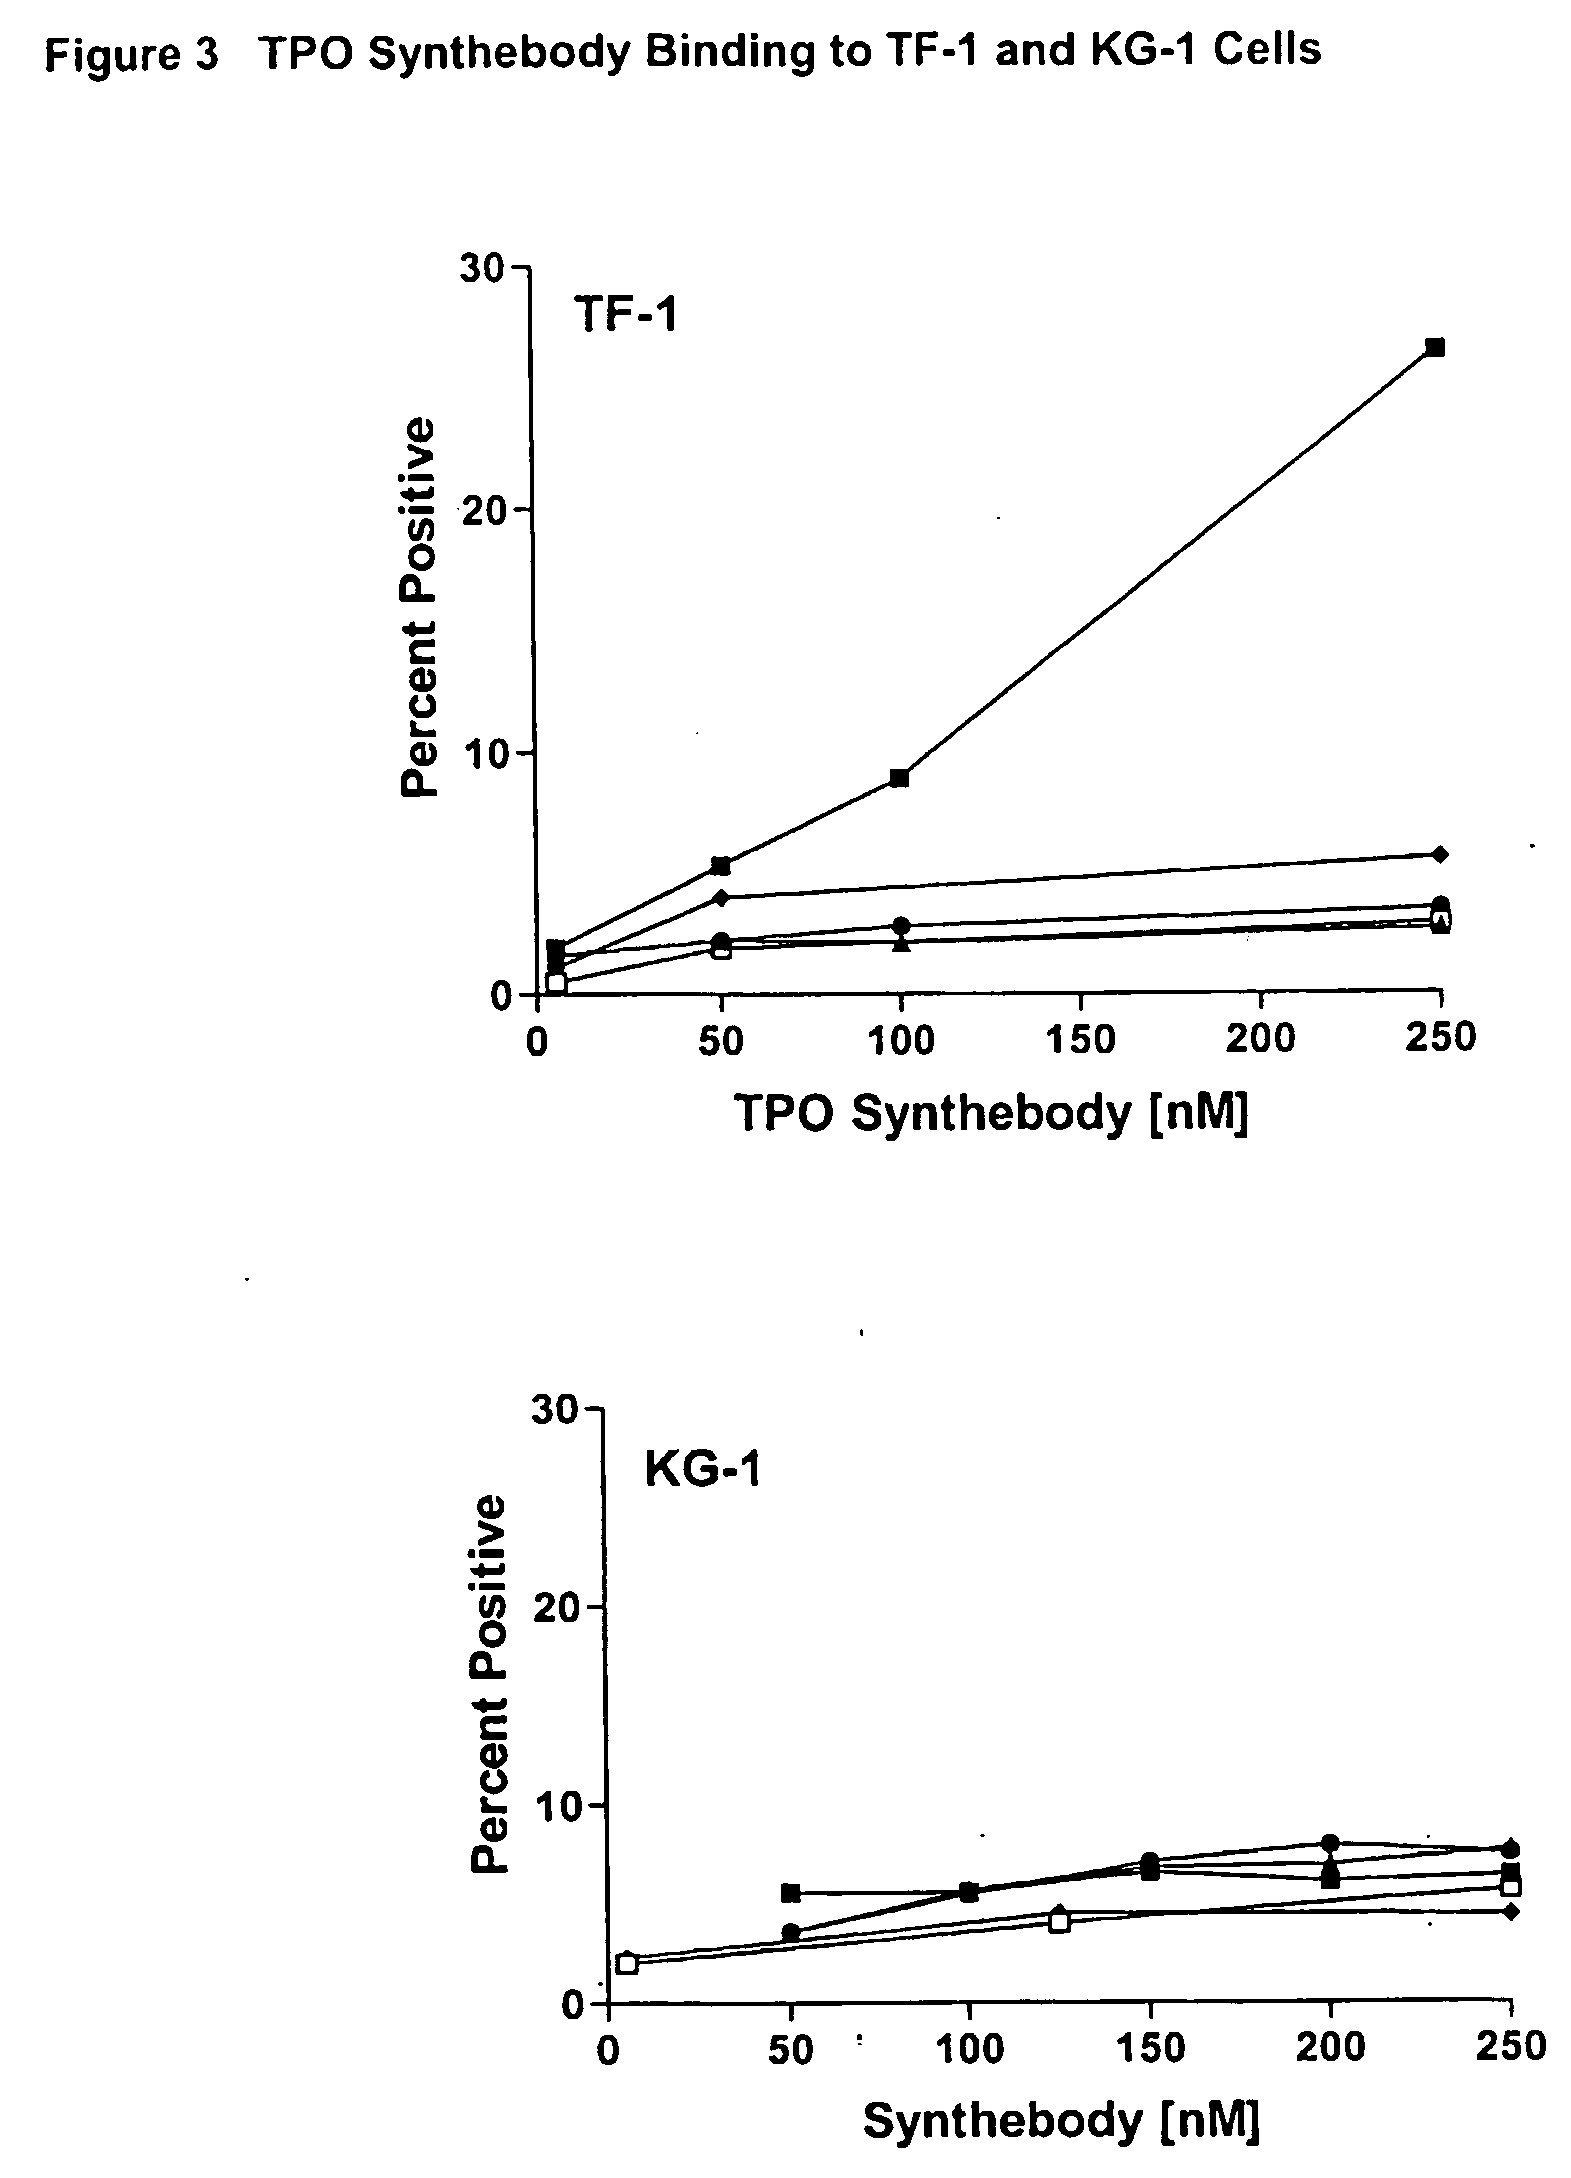 Thrombopoietin(tpo) synthebody for stimulation of platelet production